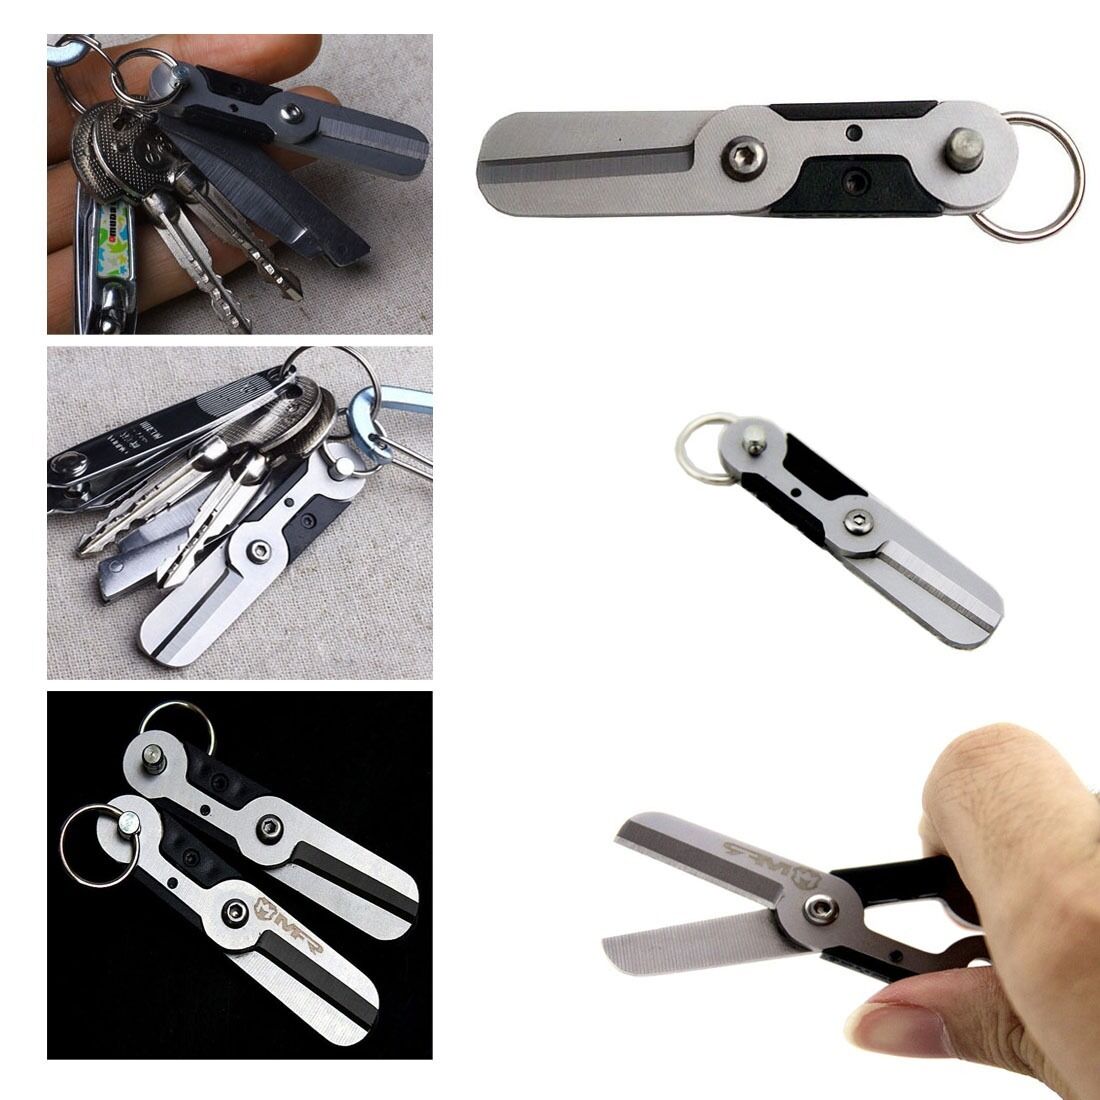 Mini Pocket Stainless Steel Scissors With Key Ring High-Quality Tool Unique Gift